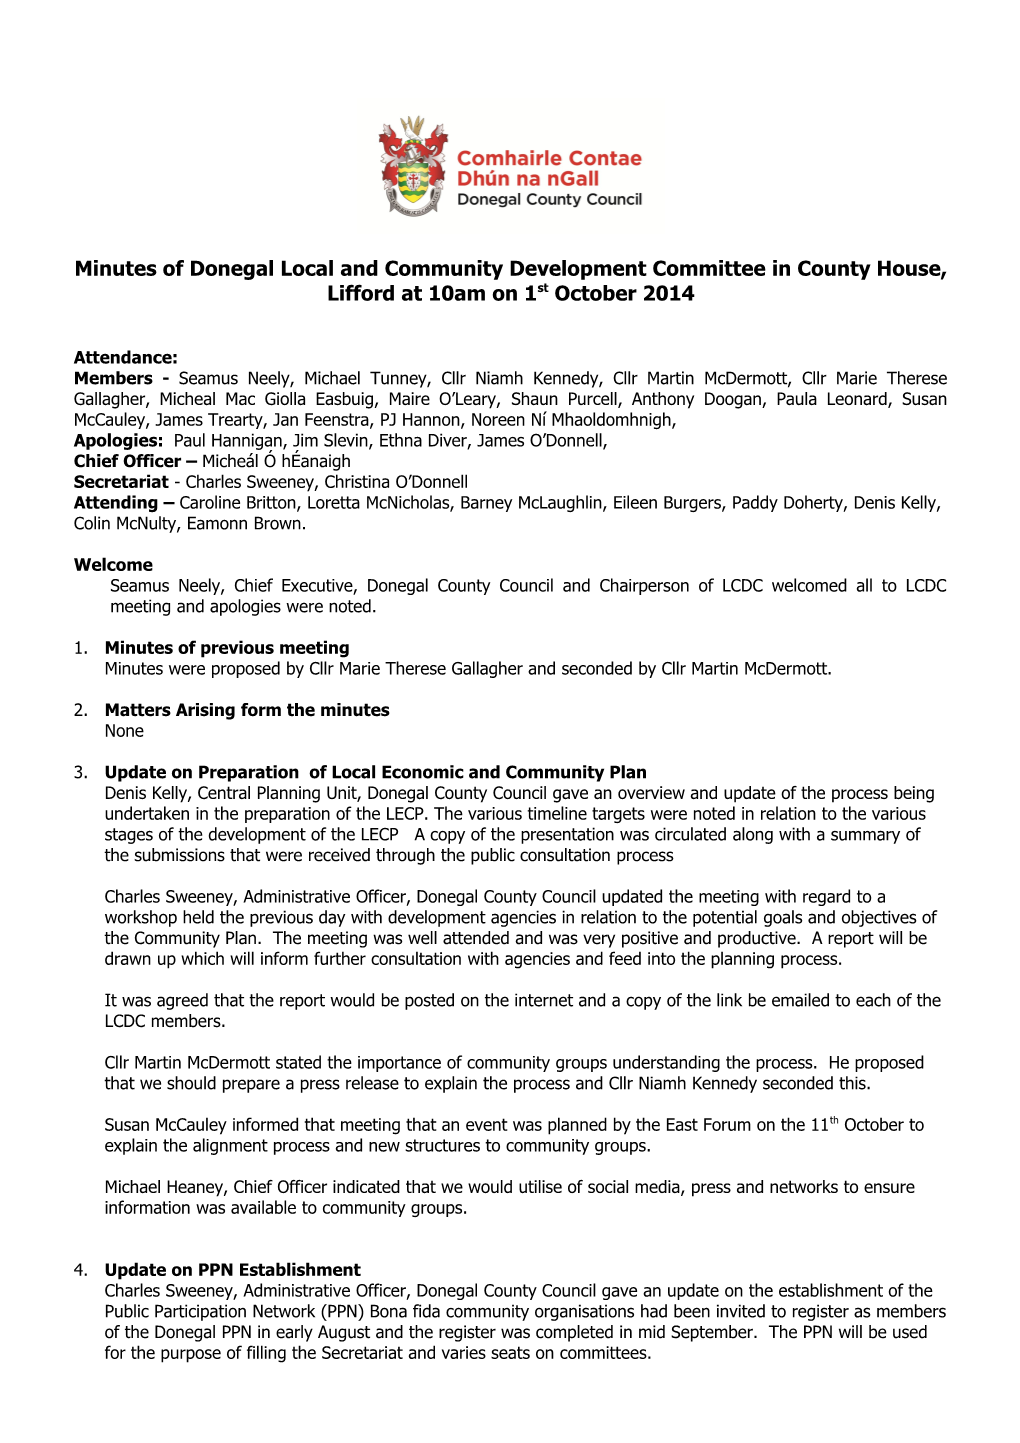 Minutes of Donegal Local and Community Development Committee in County House, Lifford